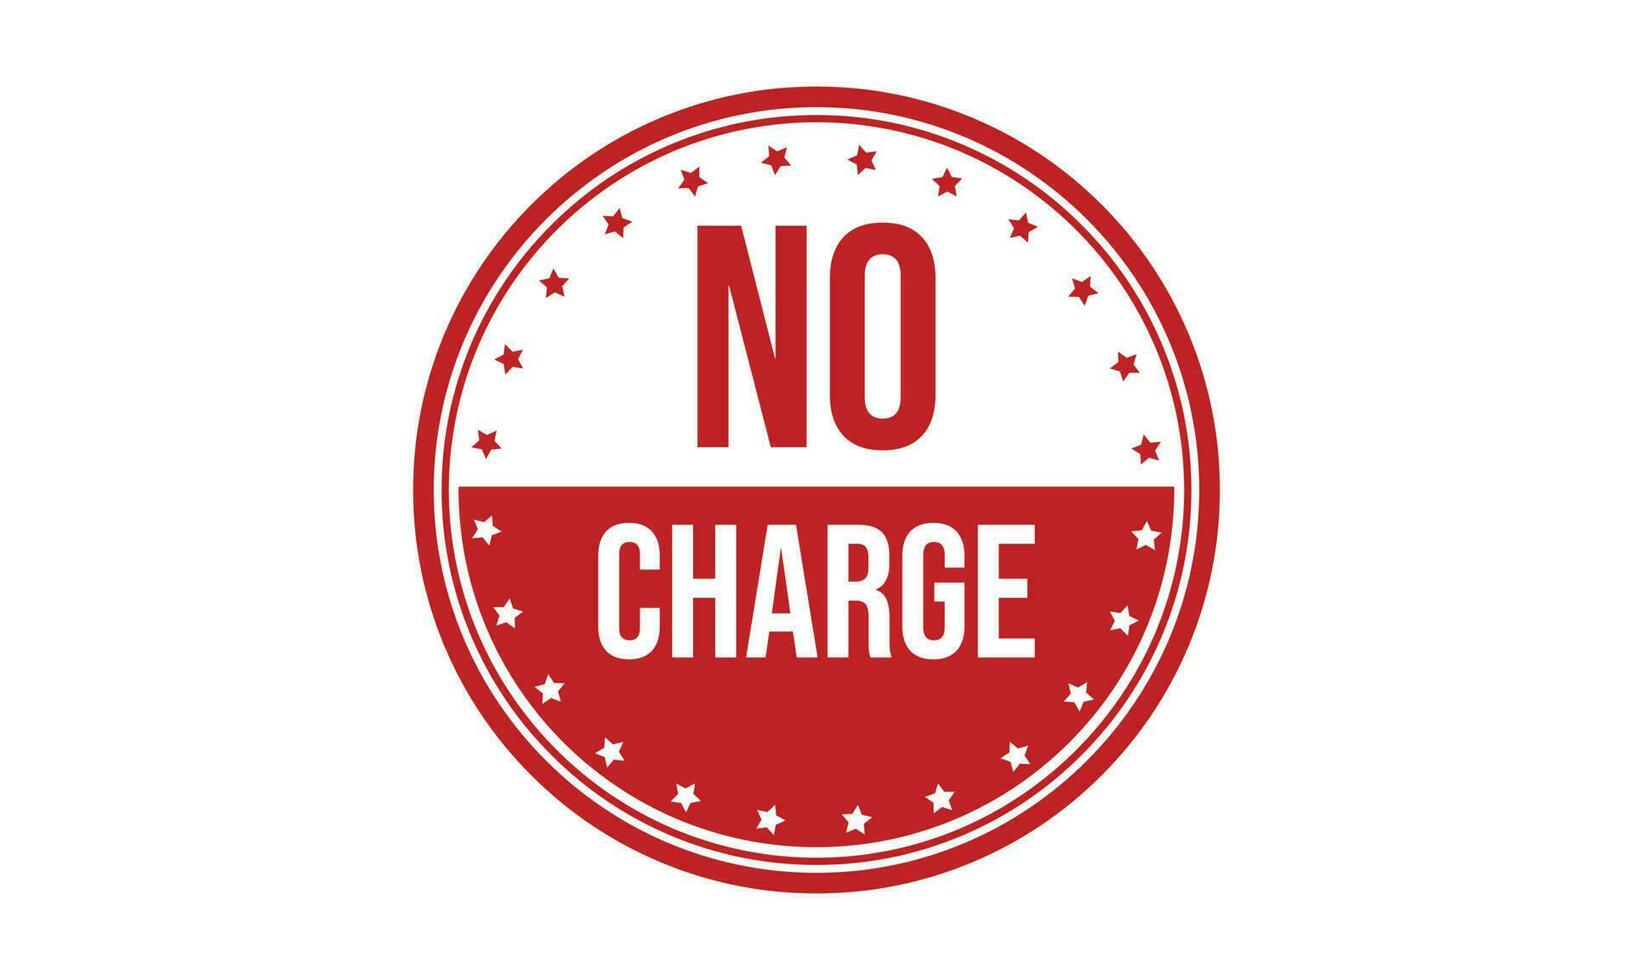 No Charge Rubber Stamp Seal Vector